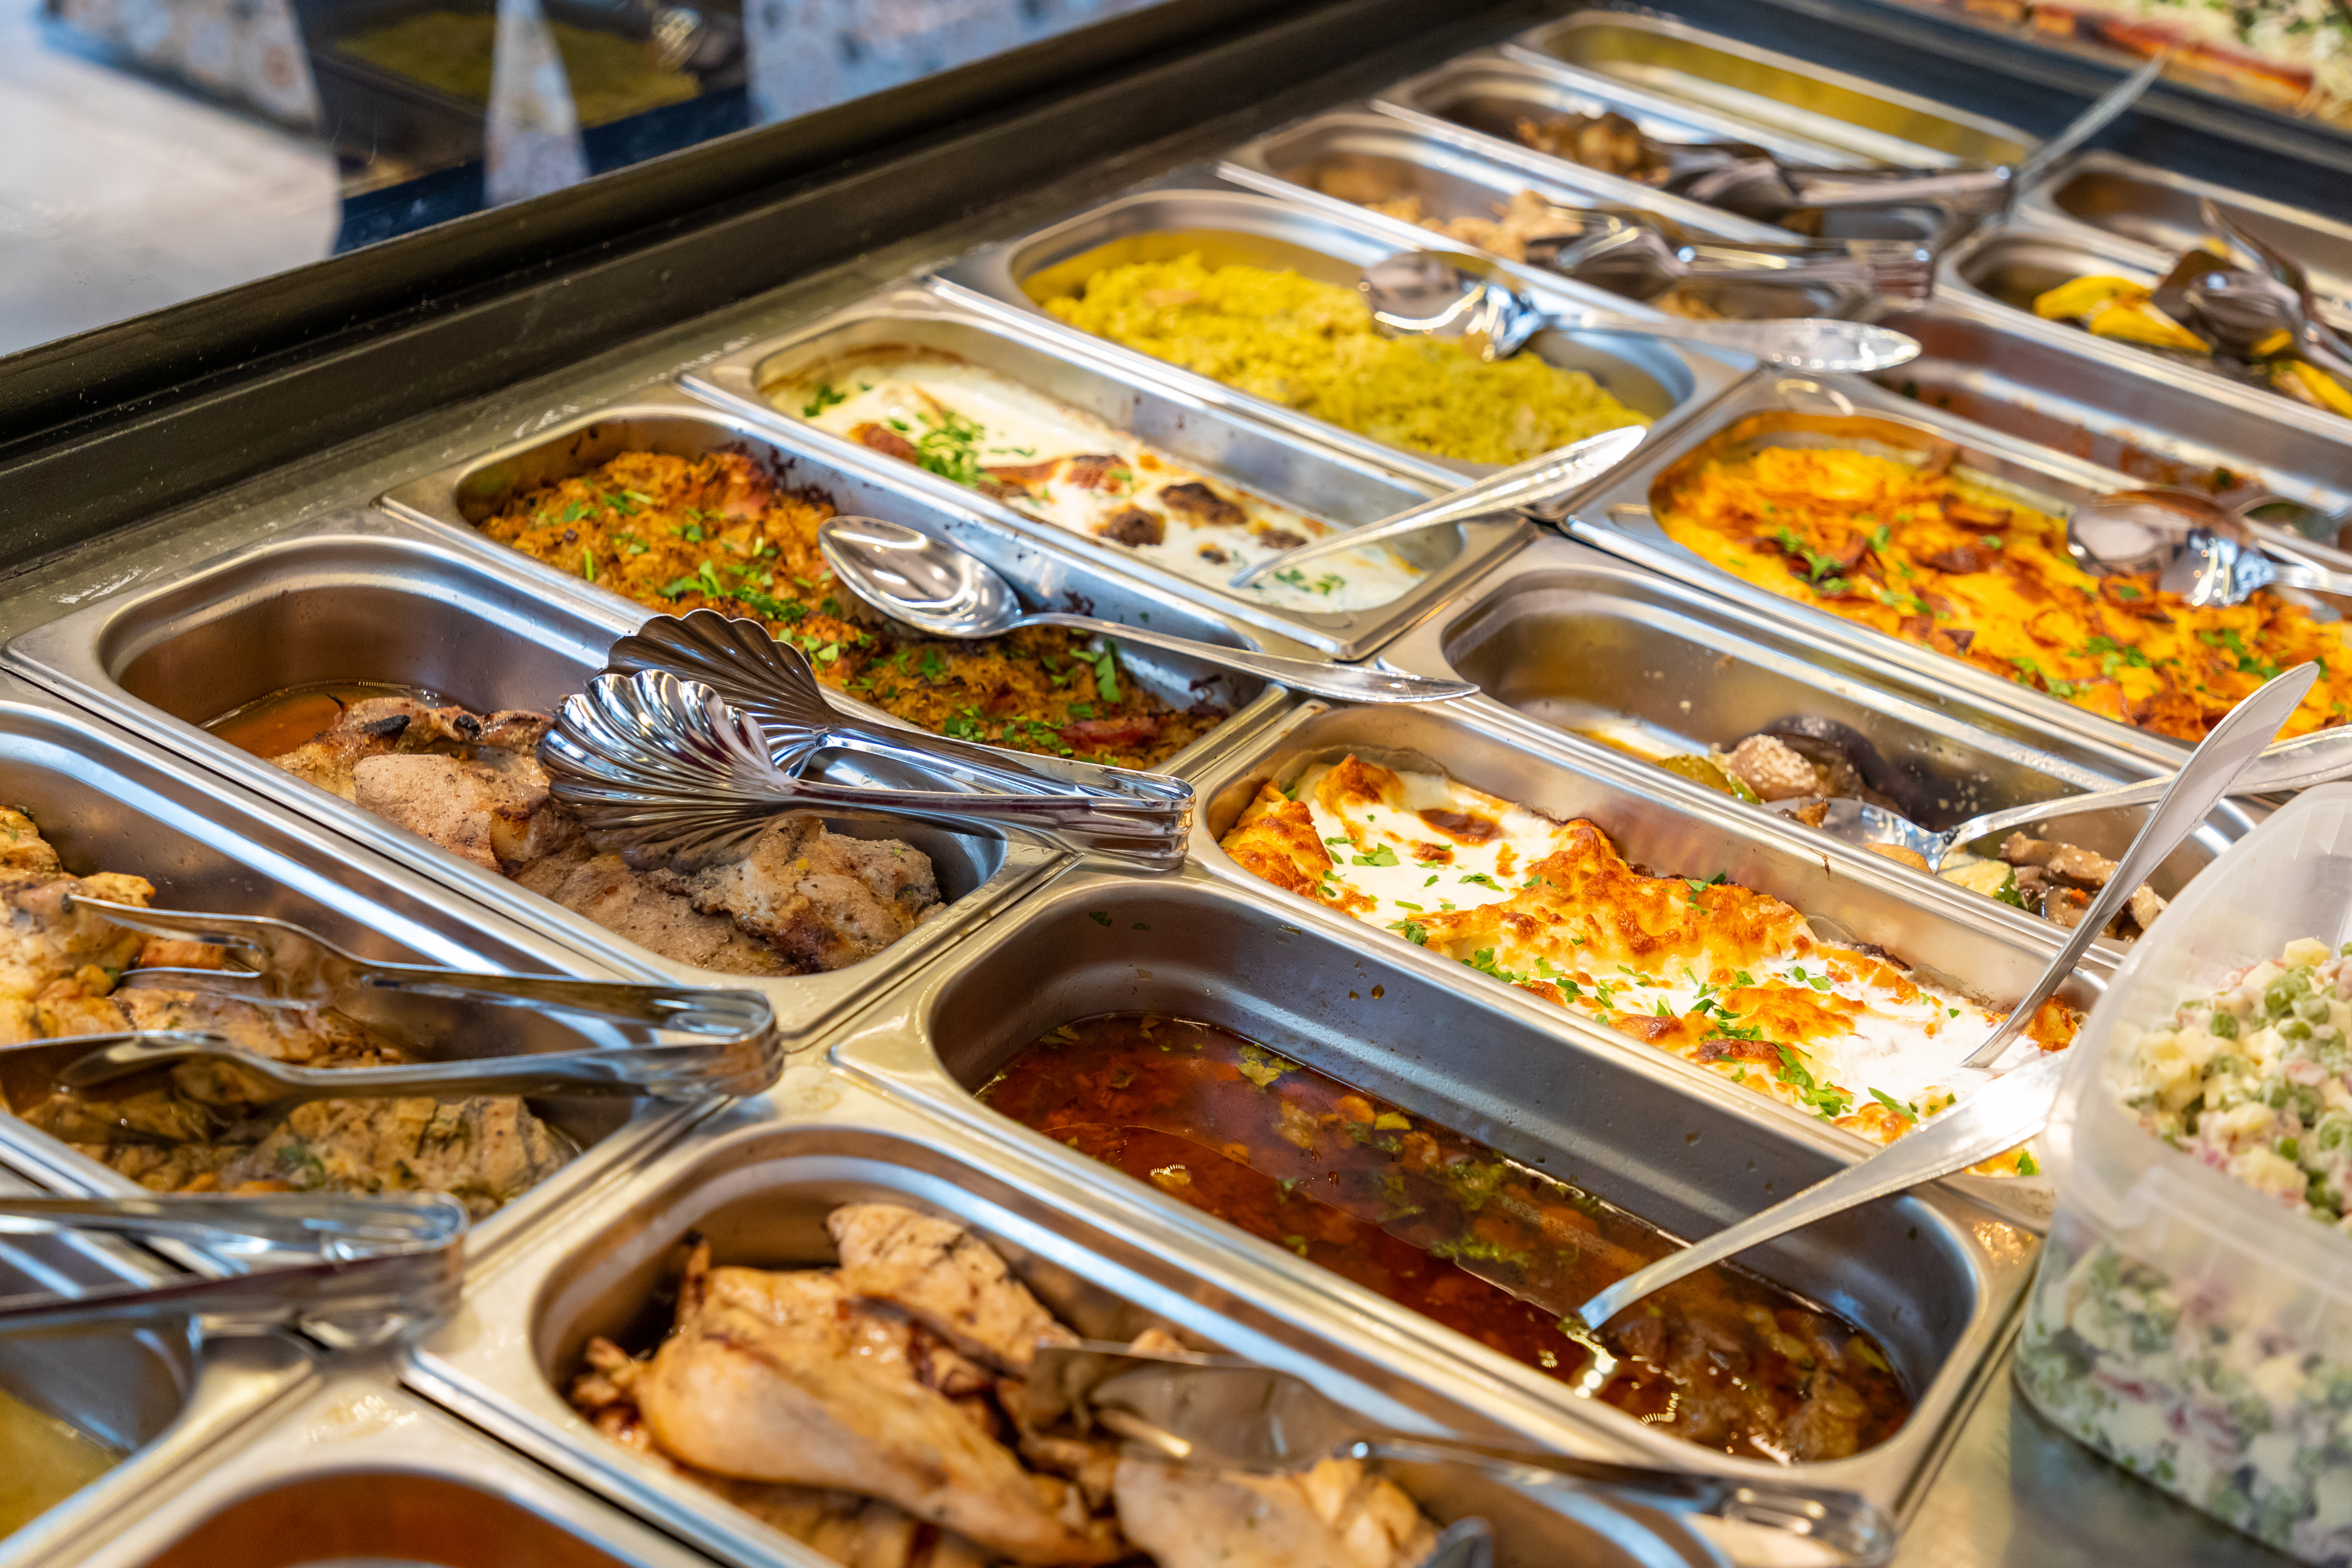 hot bar at a grocery store featuring various hot, ready-to-eat food items